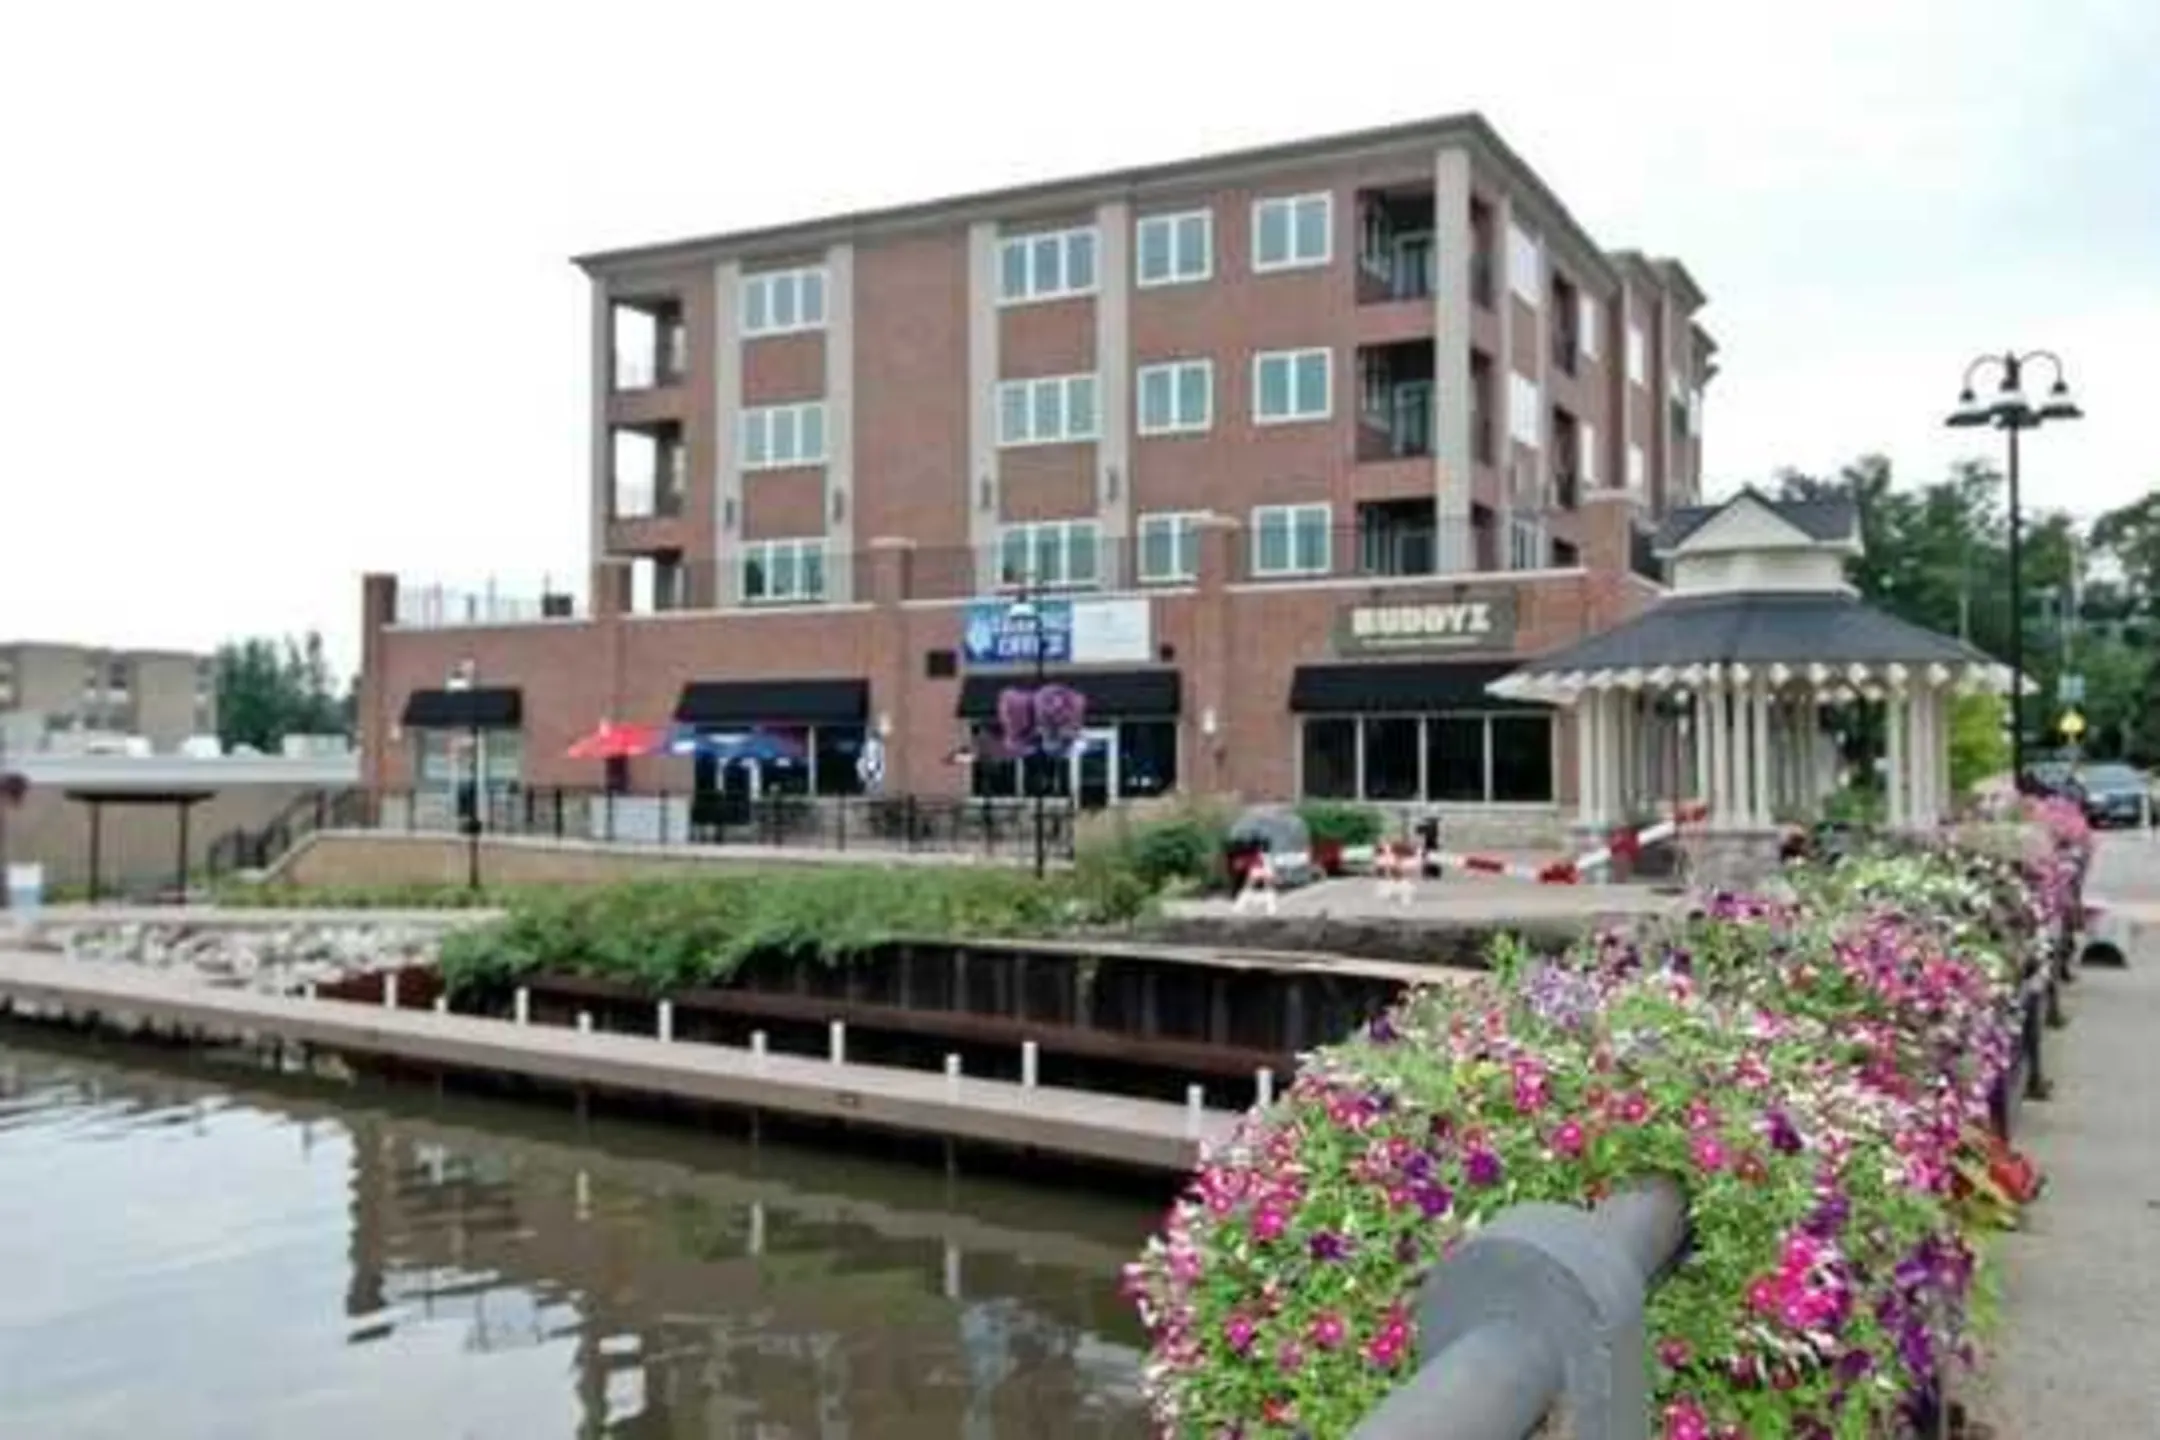 Building - River Place Luxury Residences - McHenry, IL